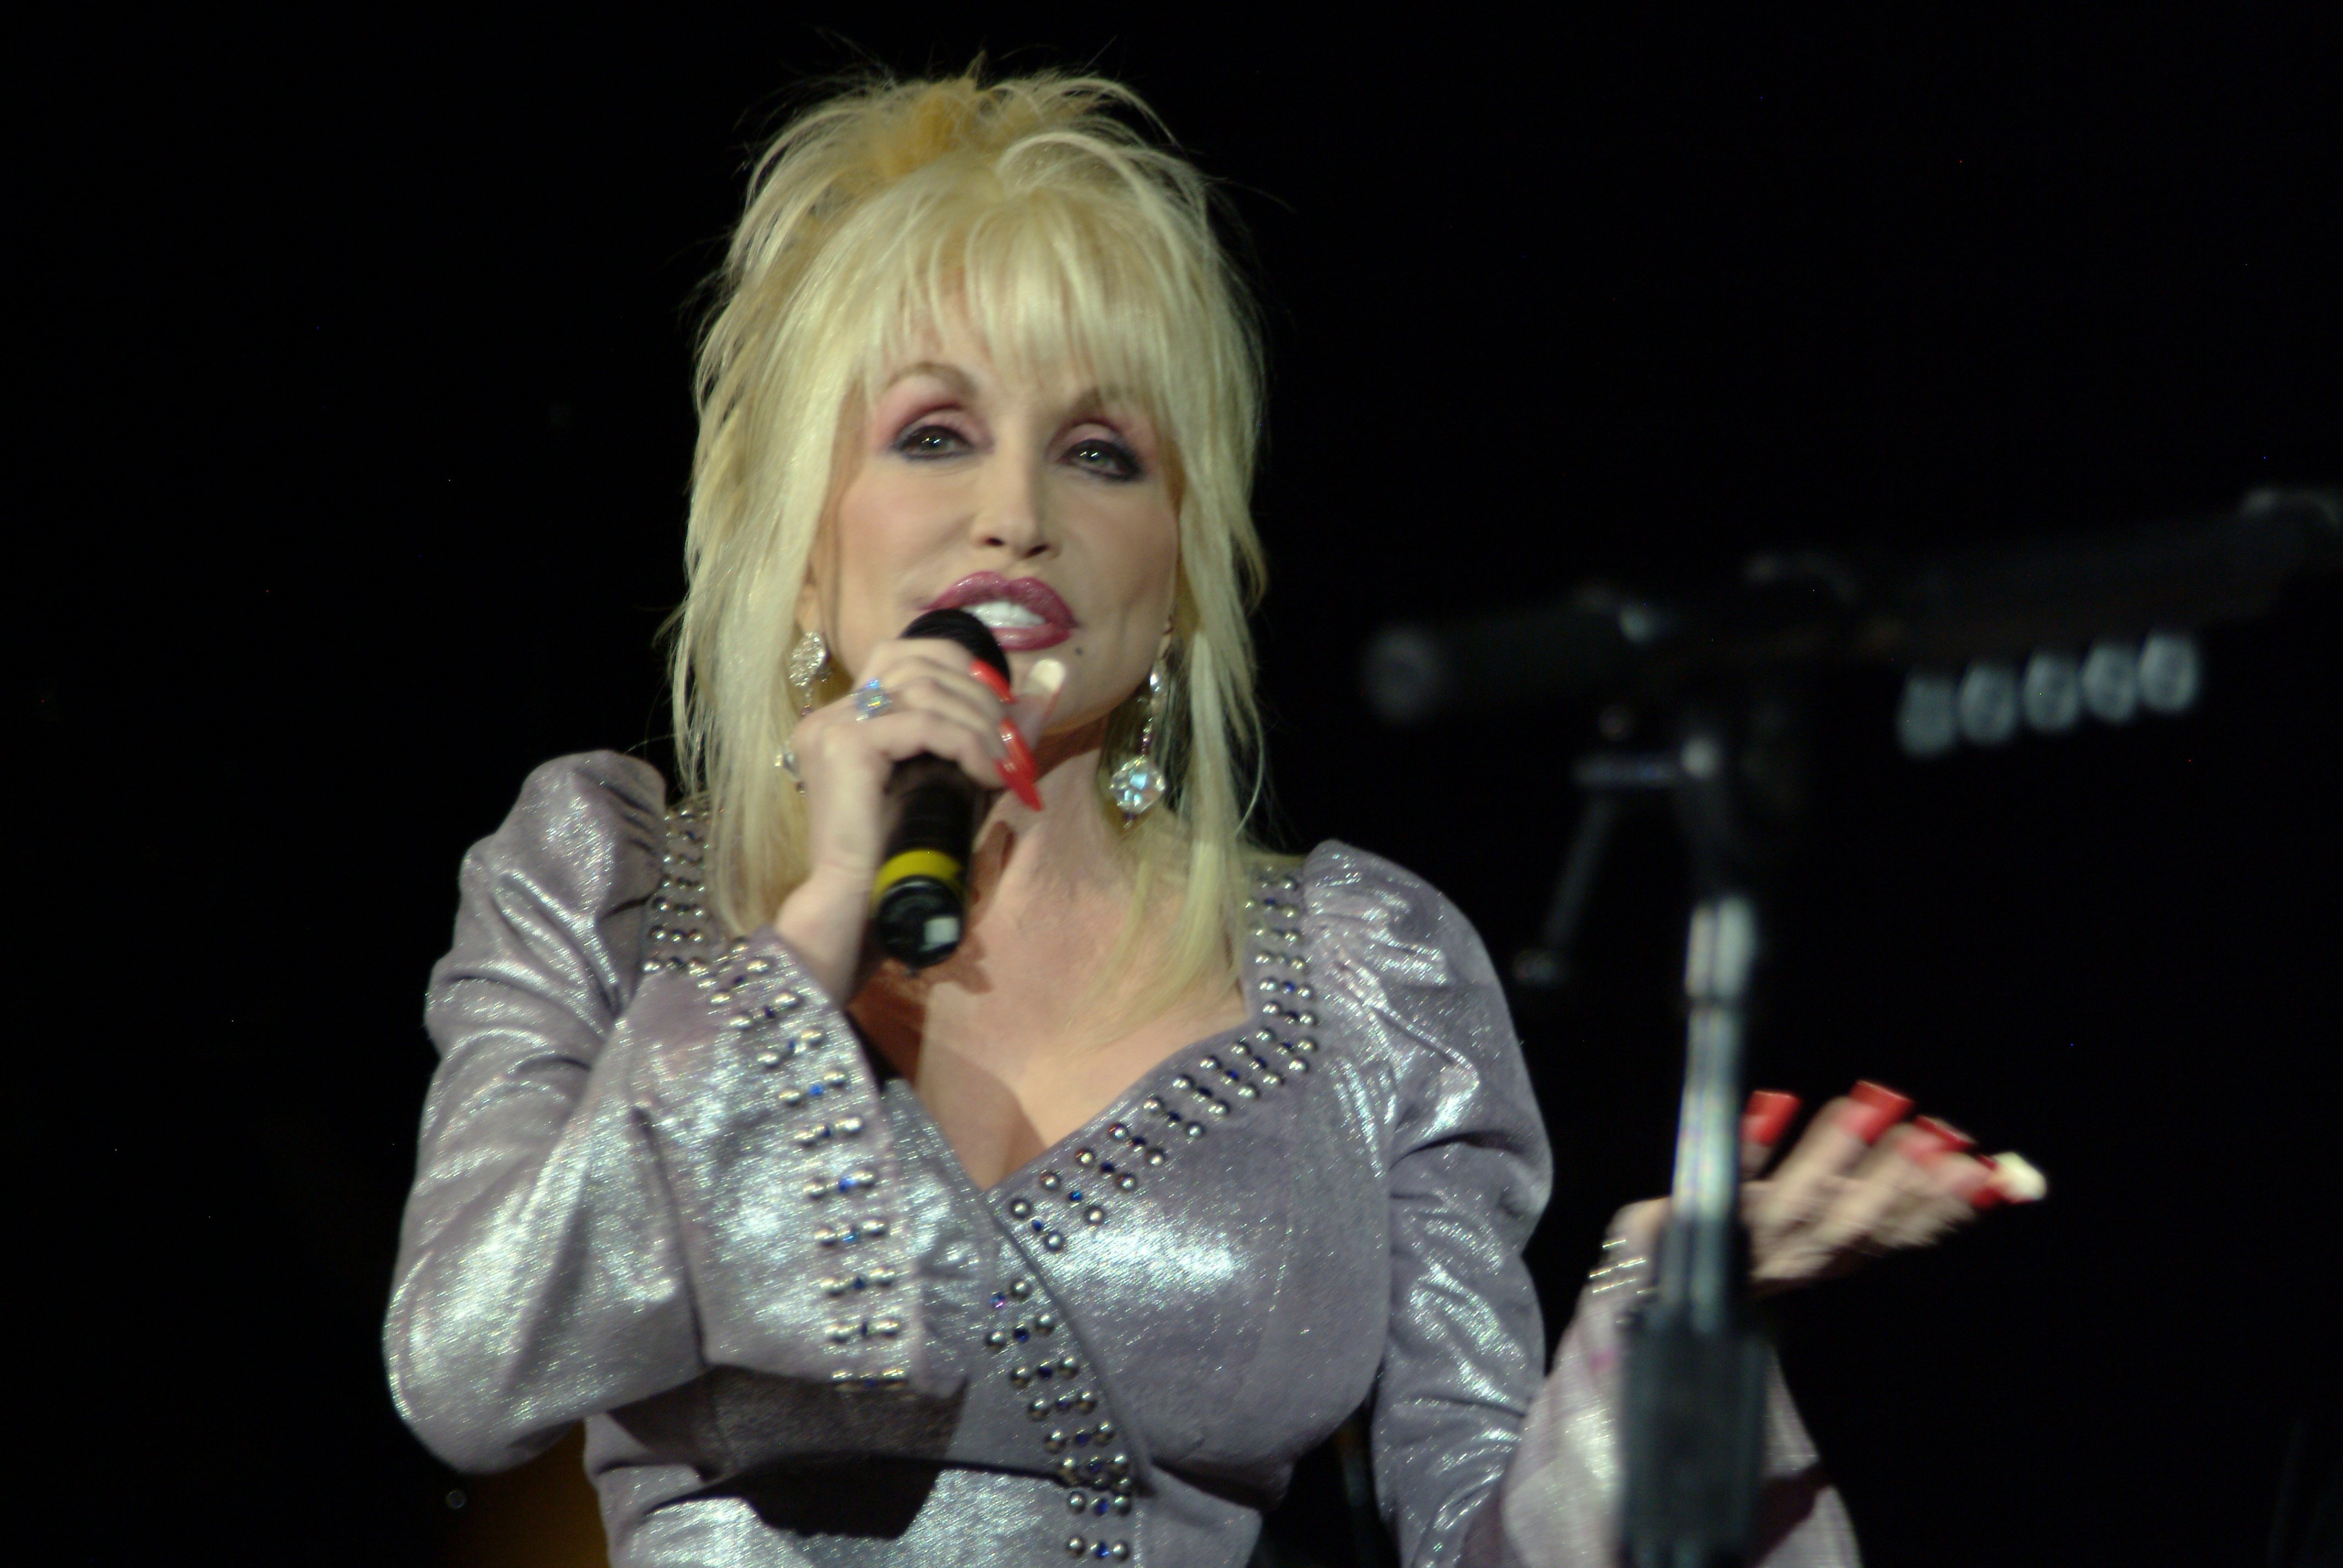 Dolly Parton speaking into a microphone in a silver outfit.